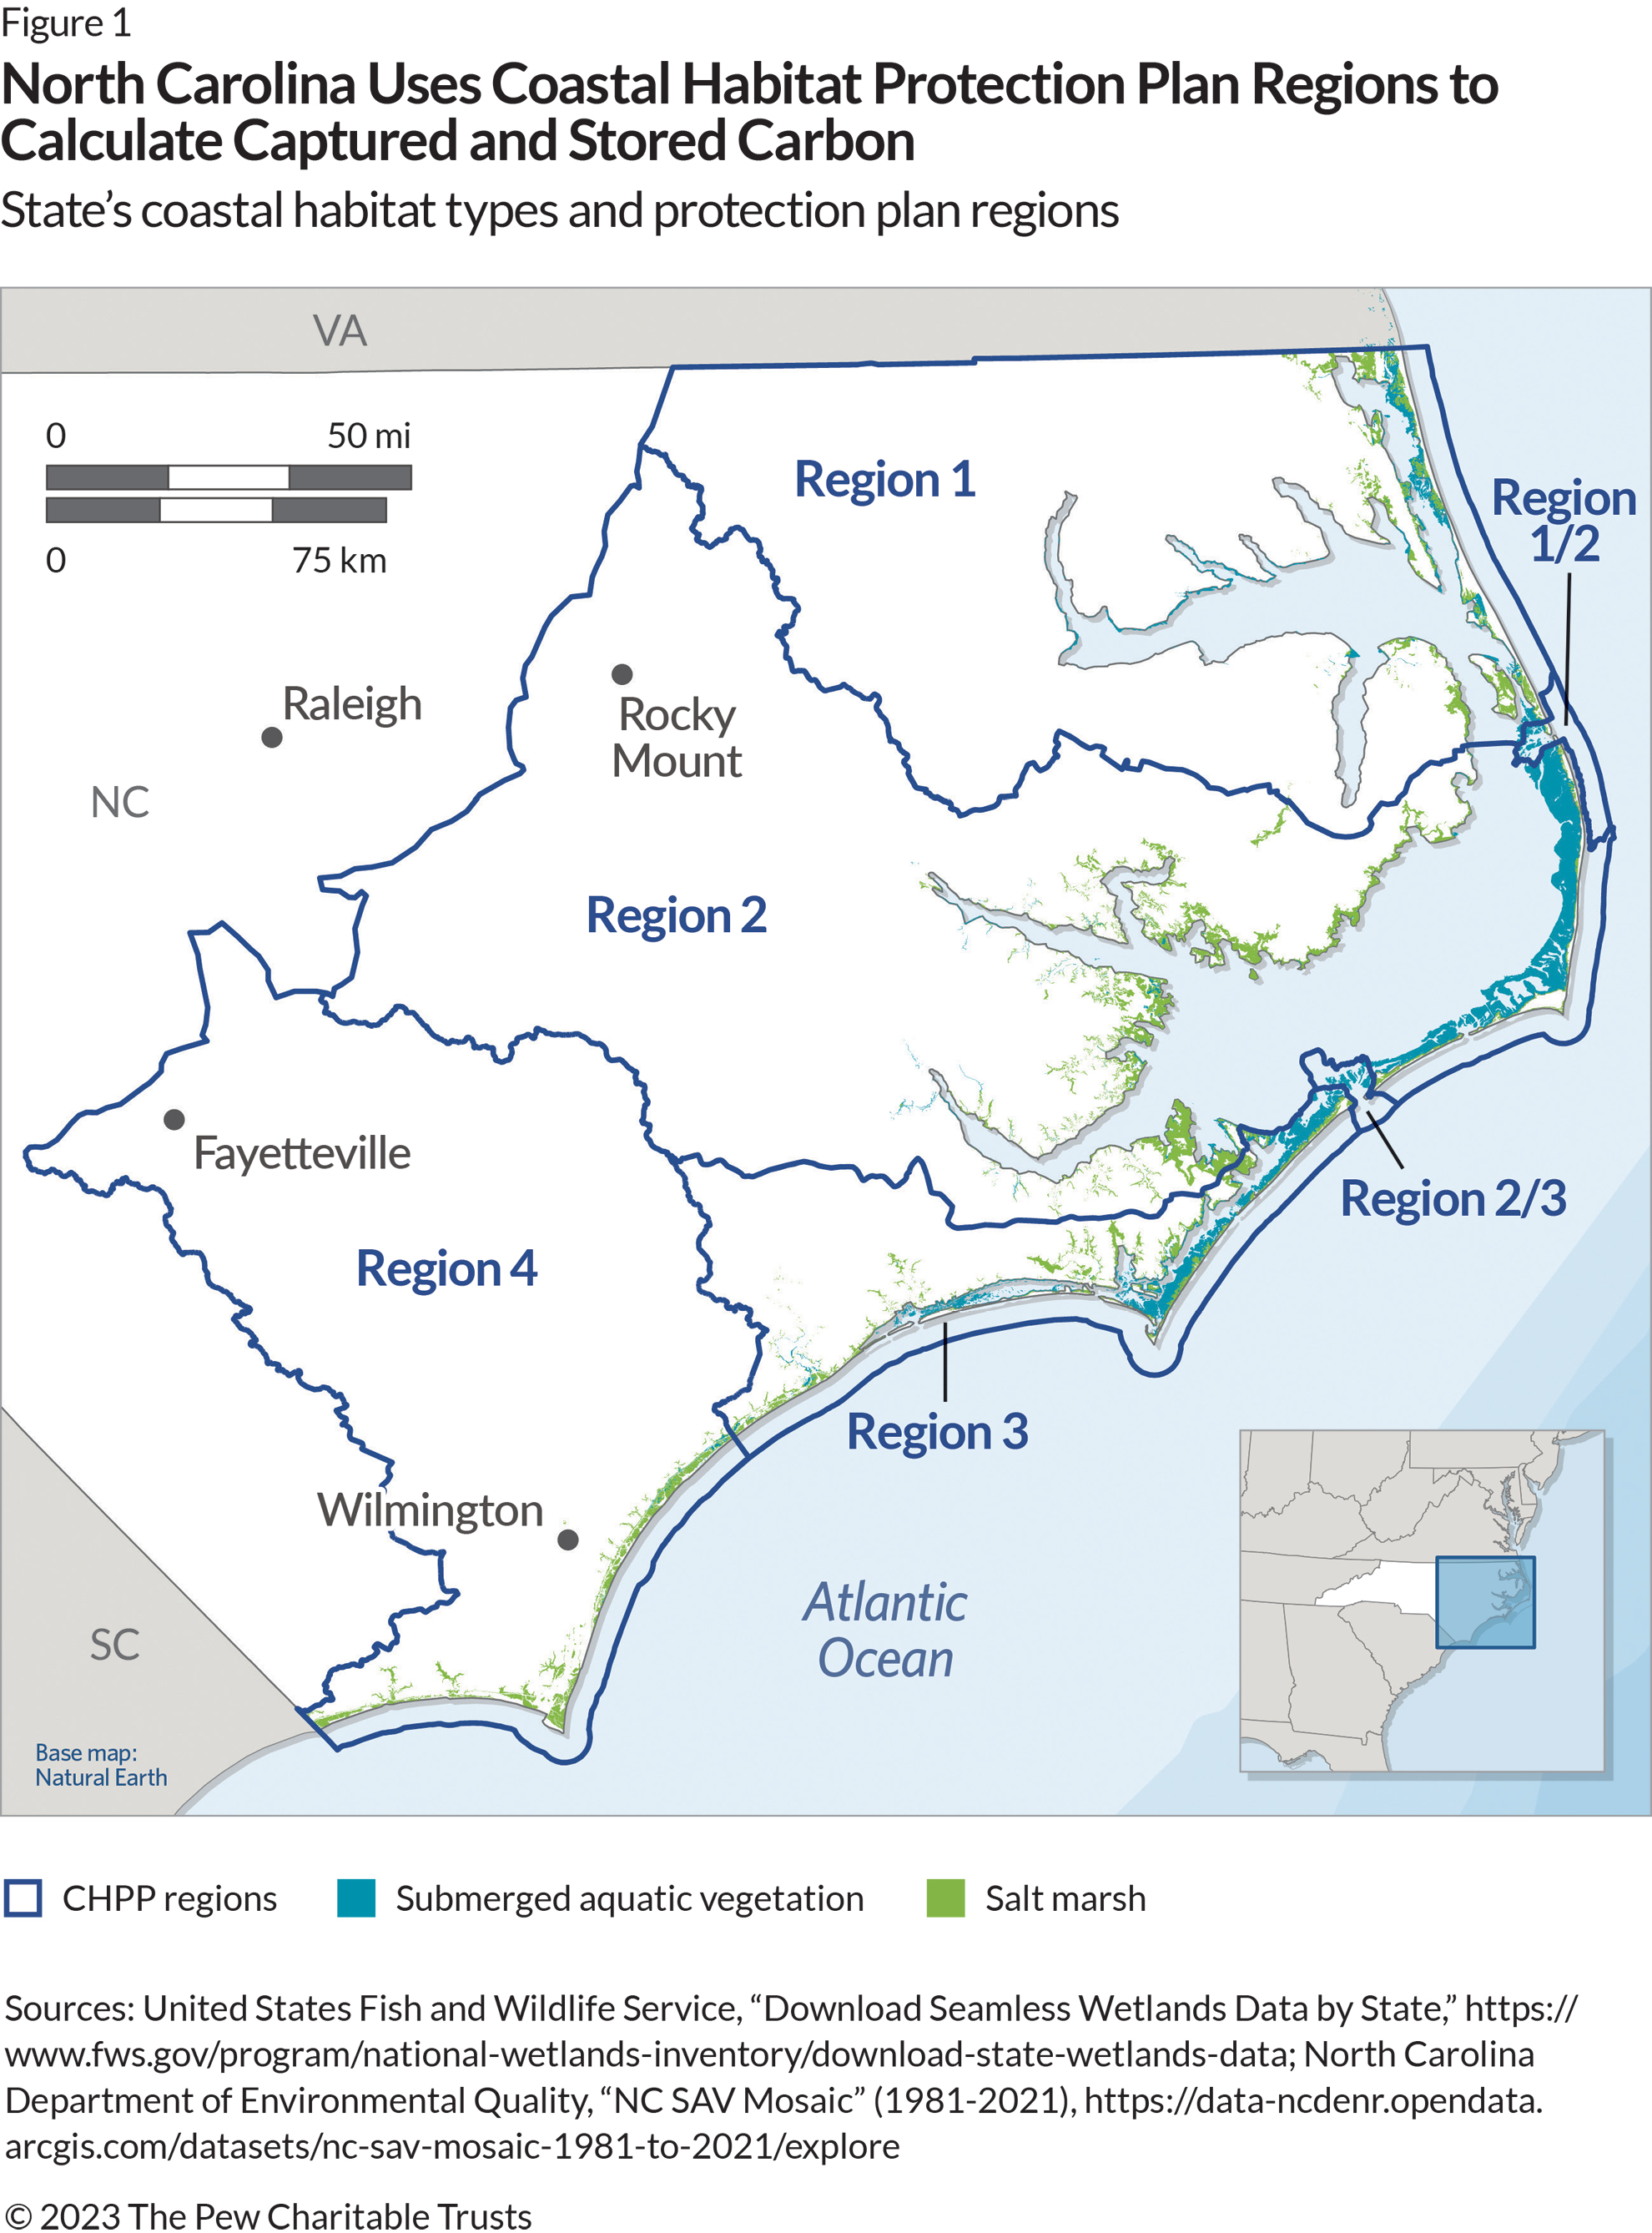 A close-in map showing the four regions—and two overlapping regional areas—designated under North Carolina’s Coastal Habitat Protection Plan, as well as the locations of submerged aquatic vegetation and salt marshes.